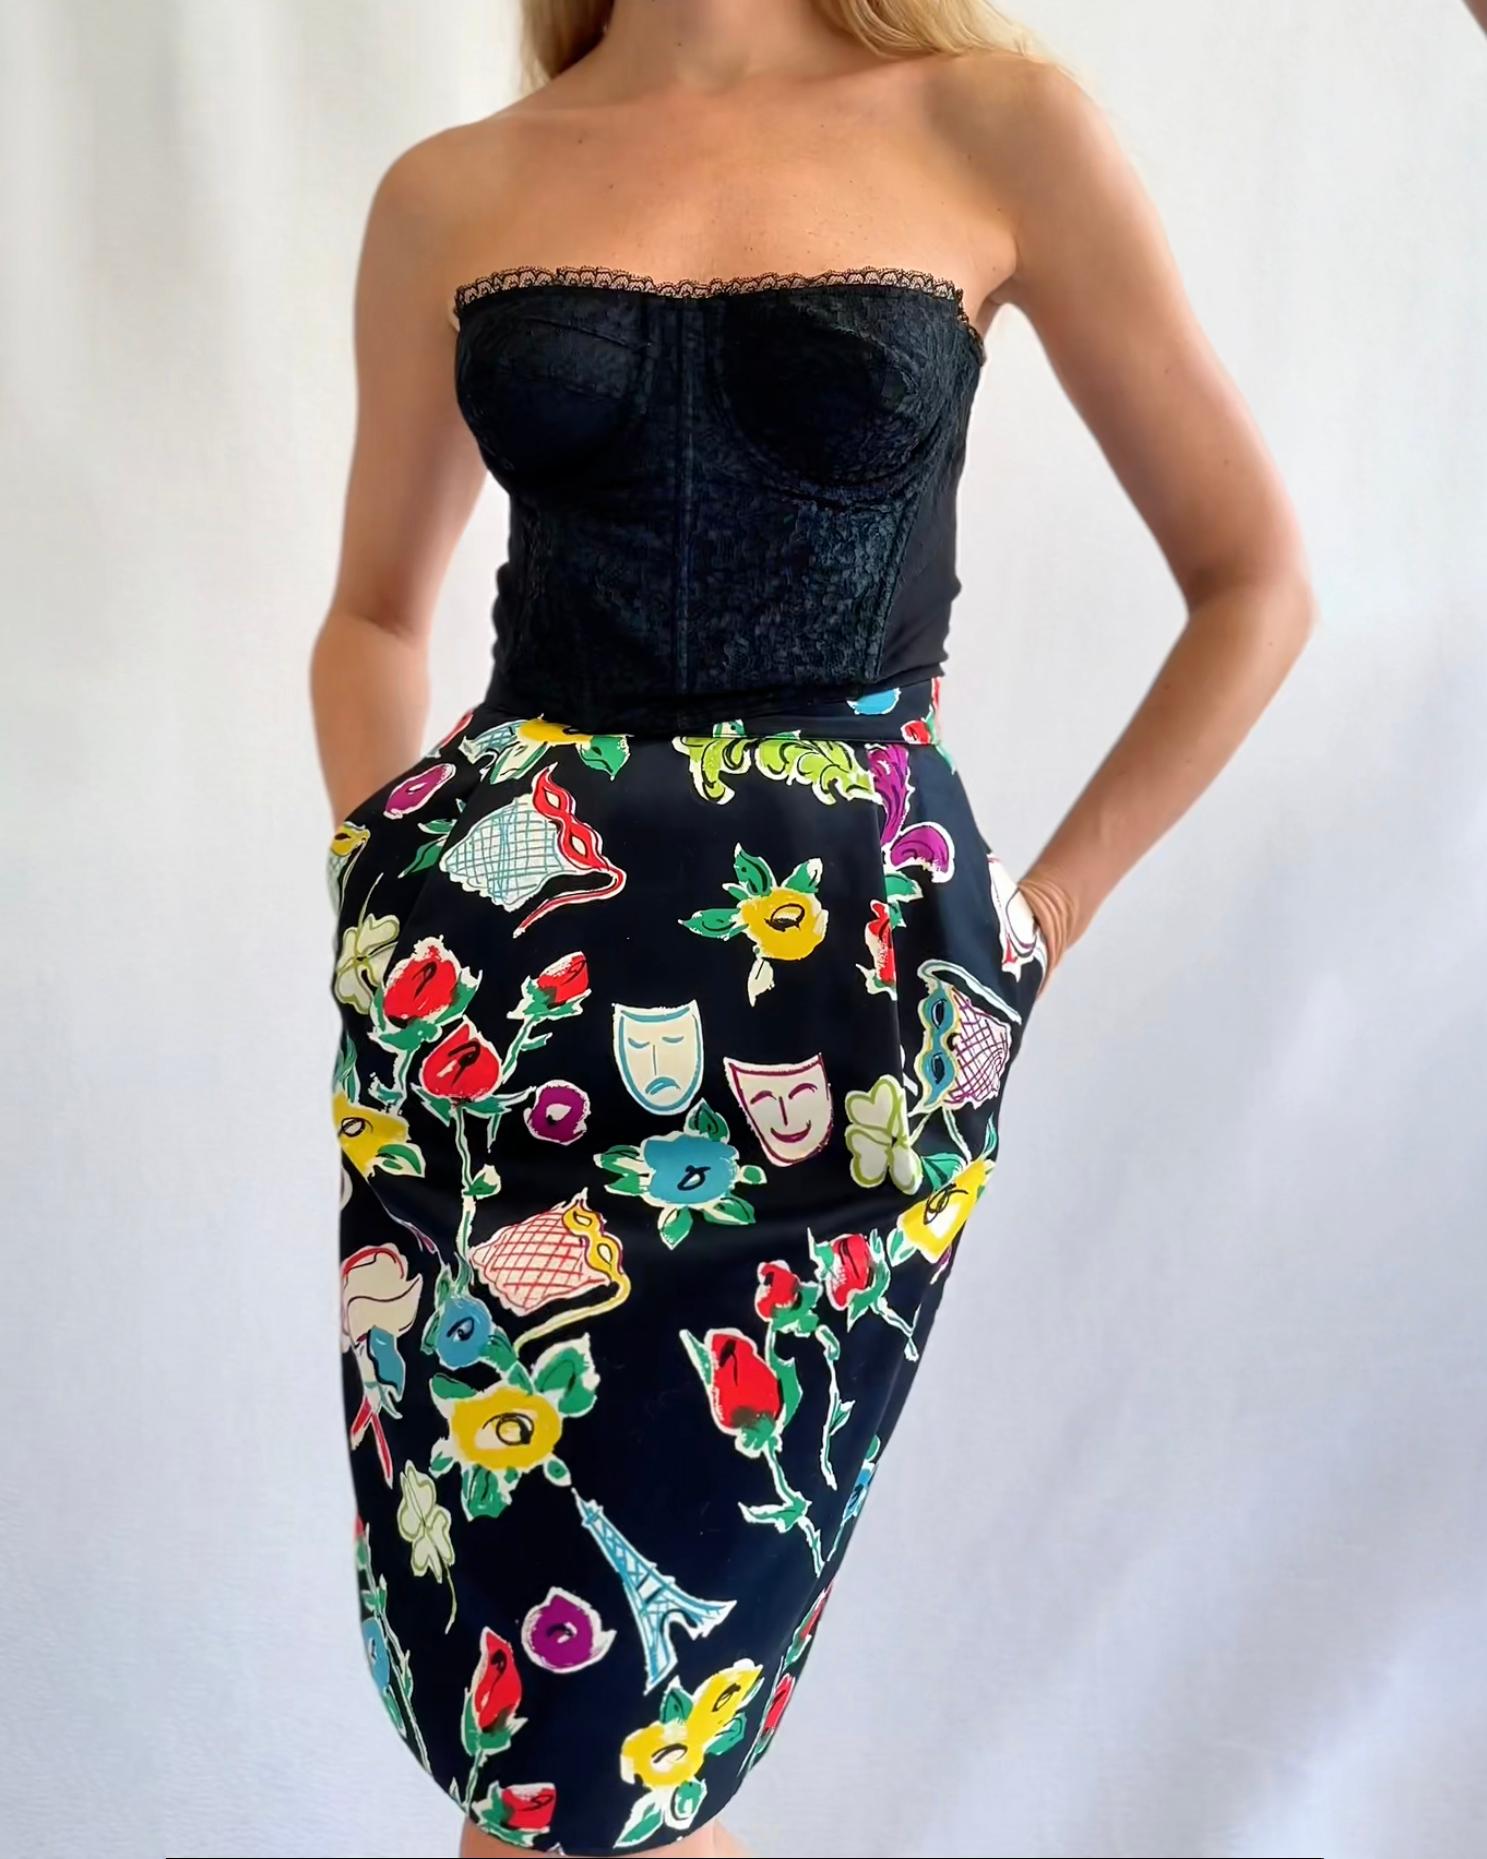 This vintage Christian Lacroix skirt features the most uniquely whimsical print, but the shape makes it quite versatile. Made in the 1990s, it features a print of florals, Eiffel Towers, opera glasses and masks, in a great colorful palette that